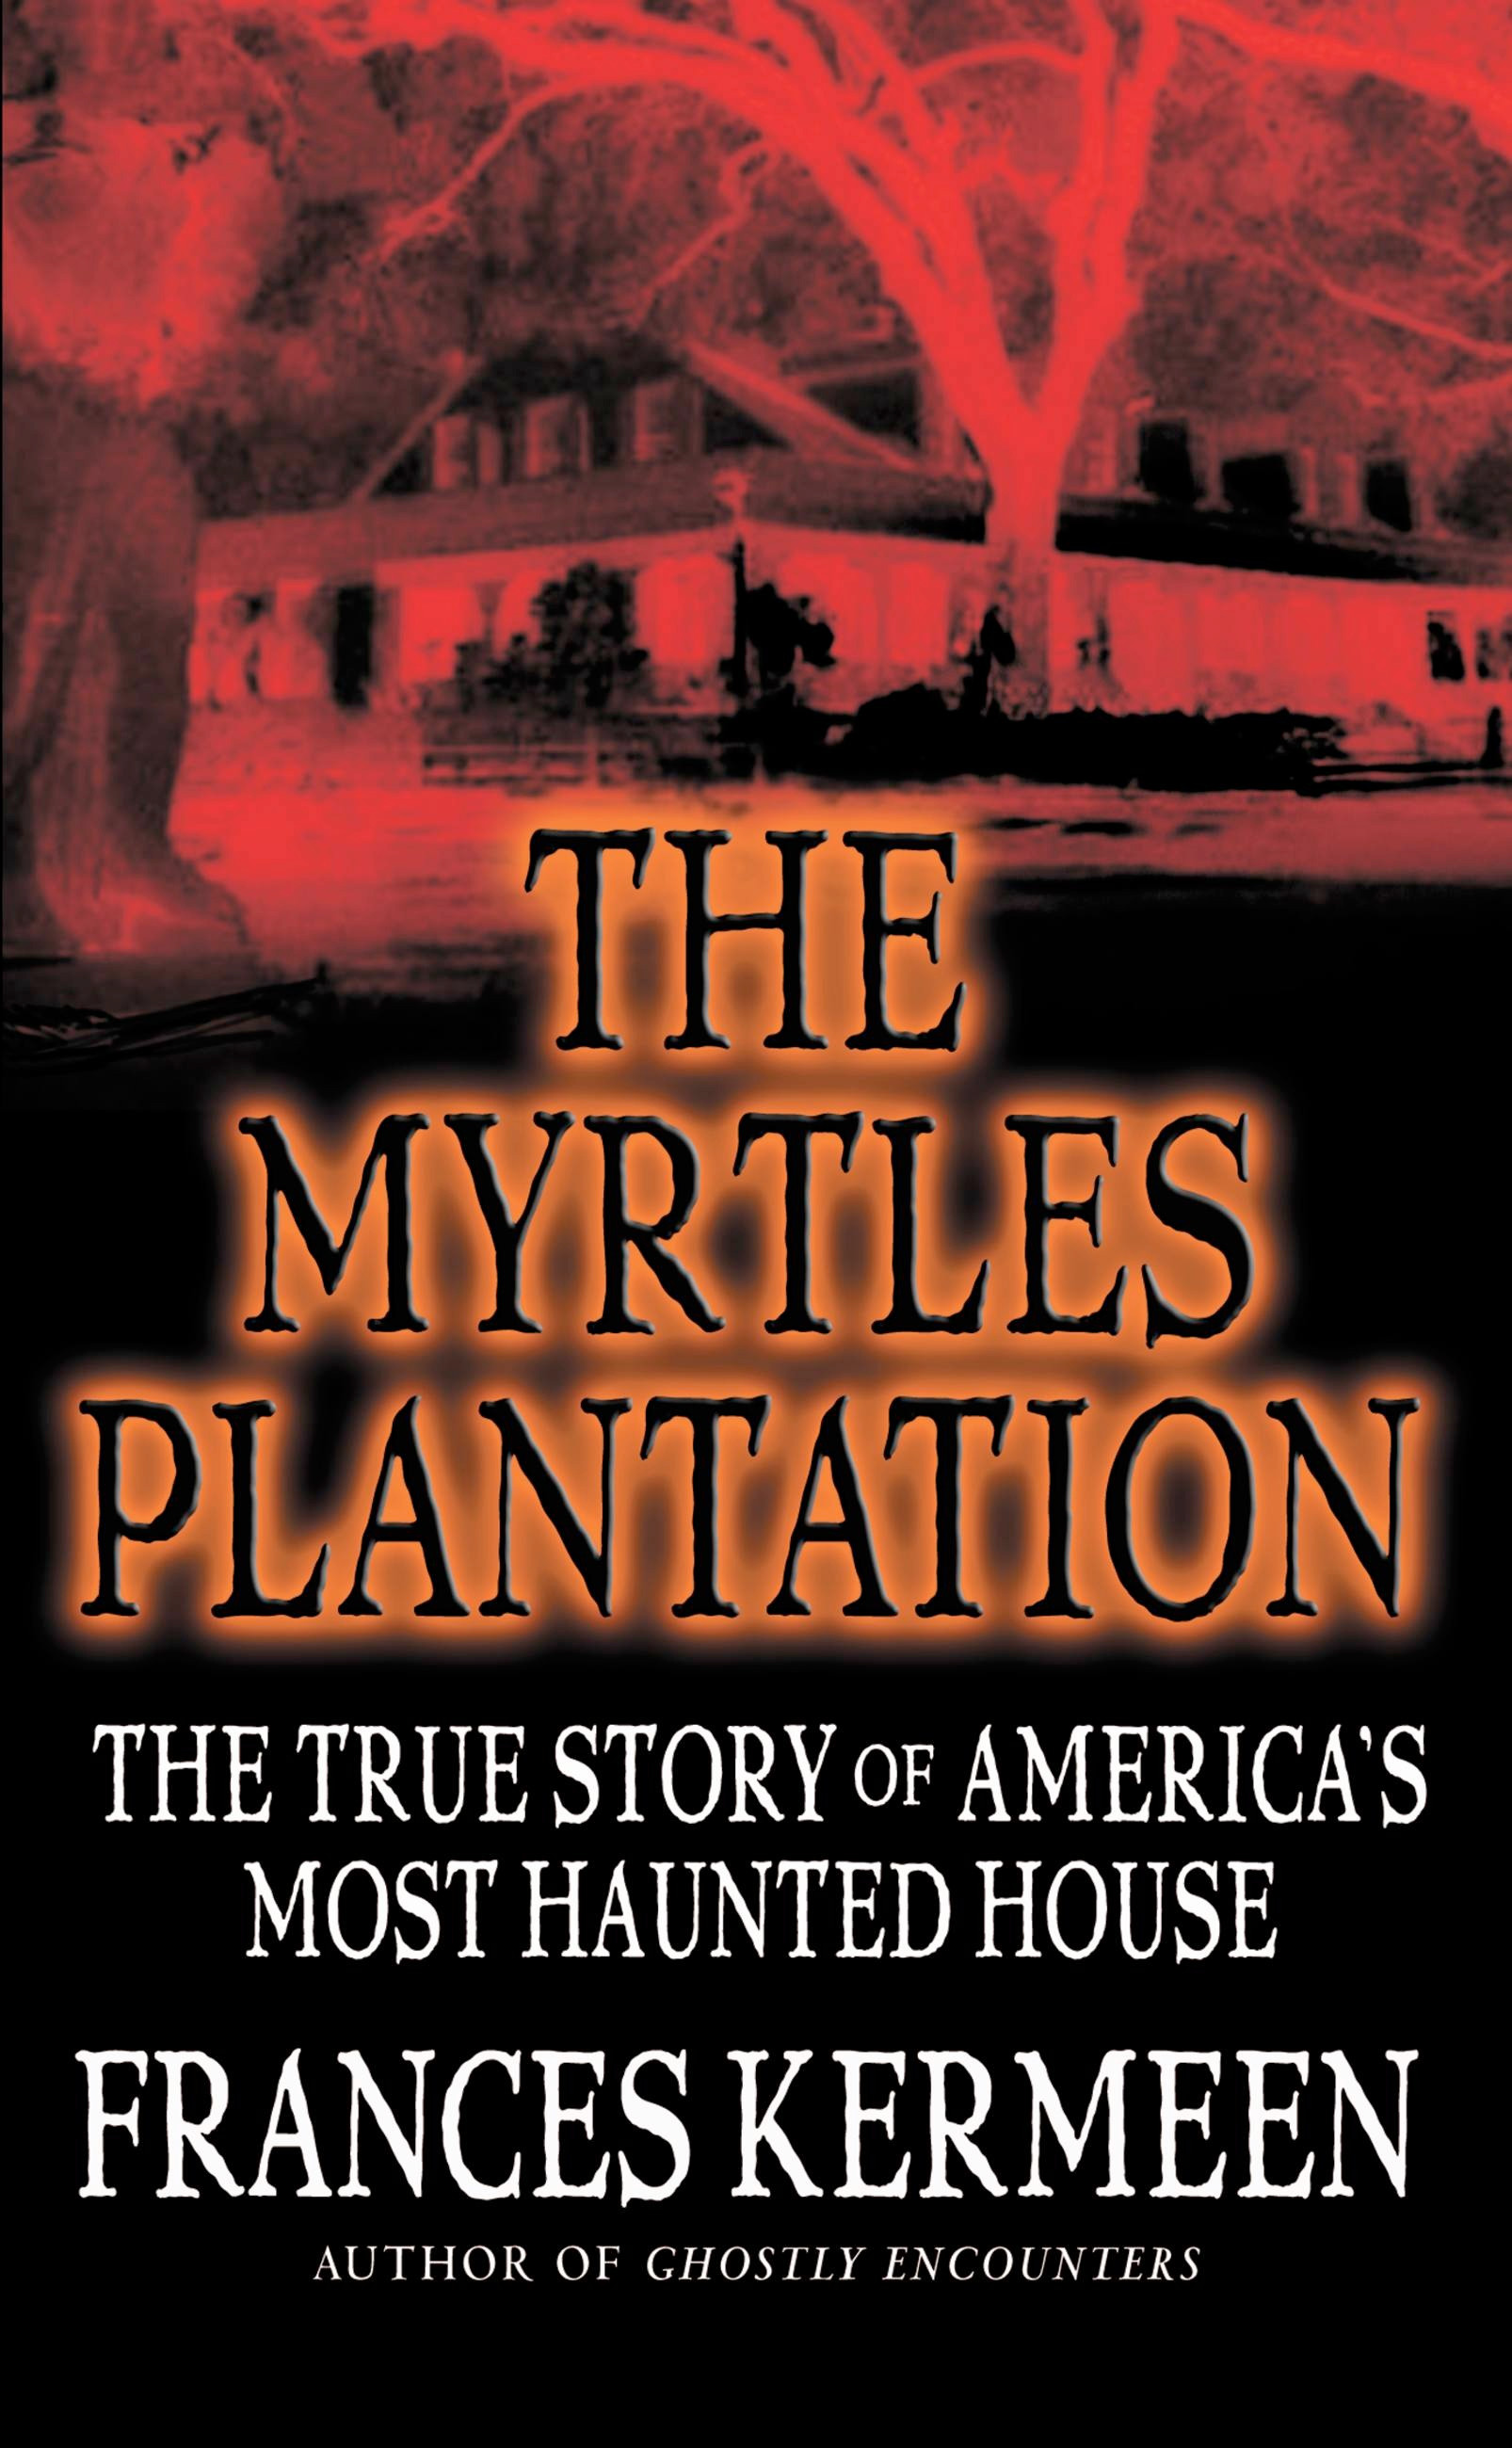 ‘The Myrtles Plantation: The True Story of America’s Most Haunted House’ by Frances Kermeen